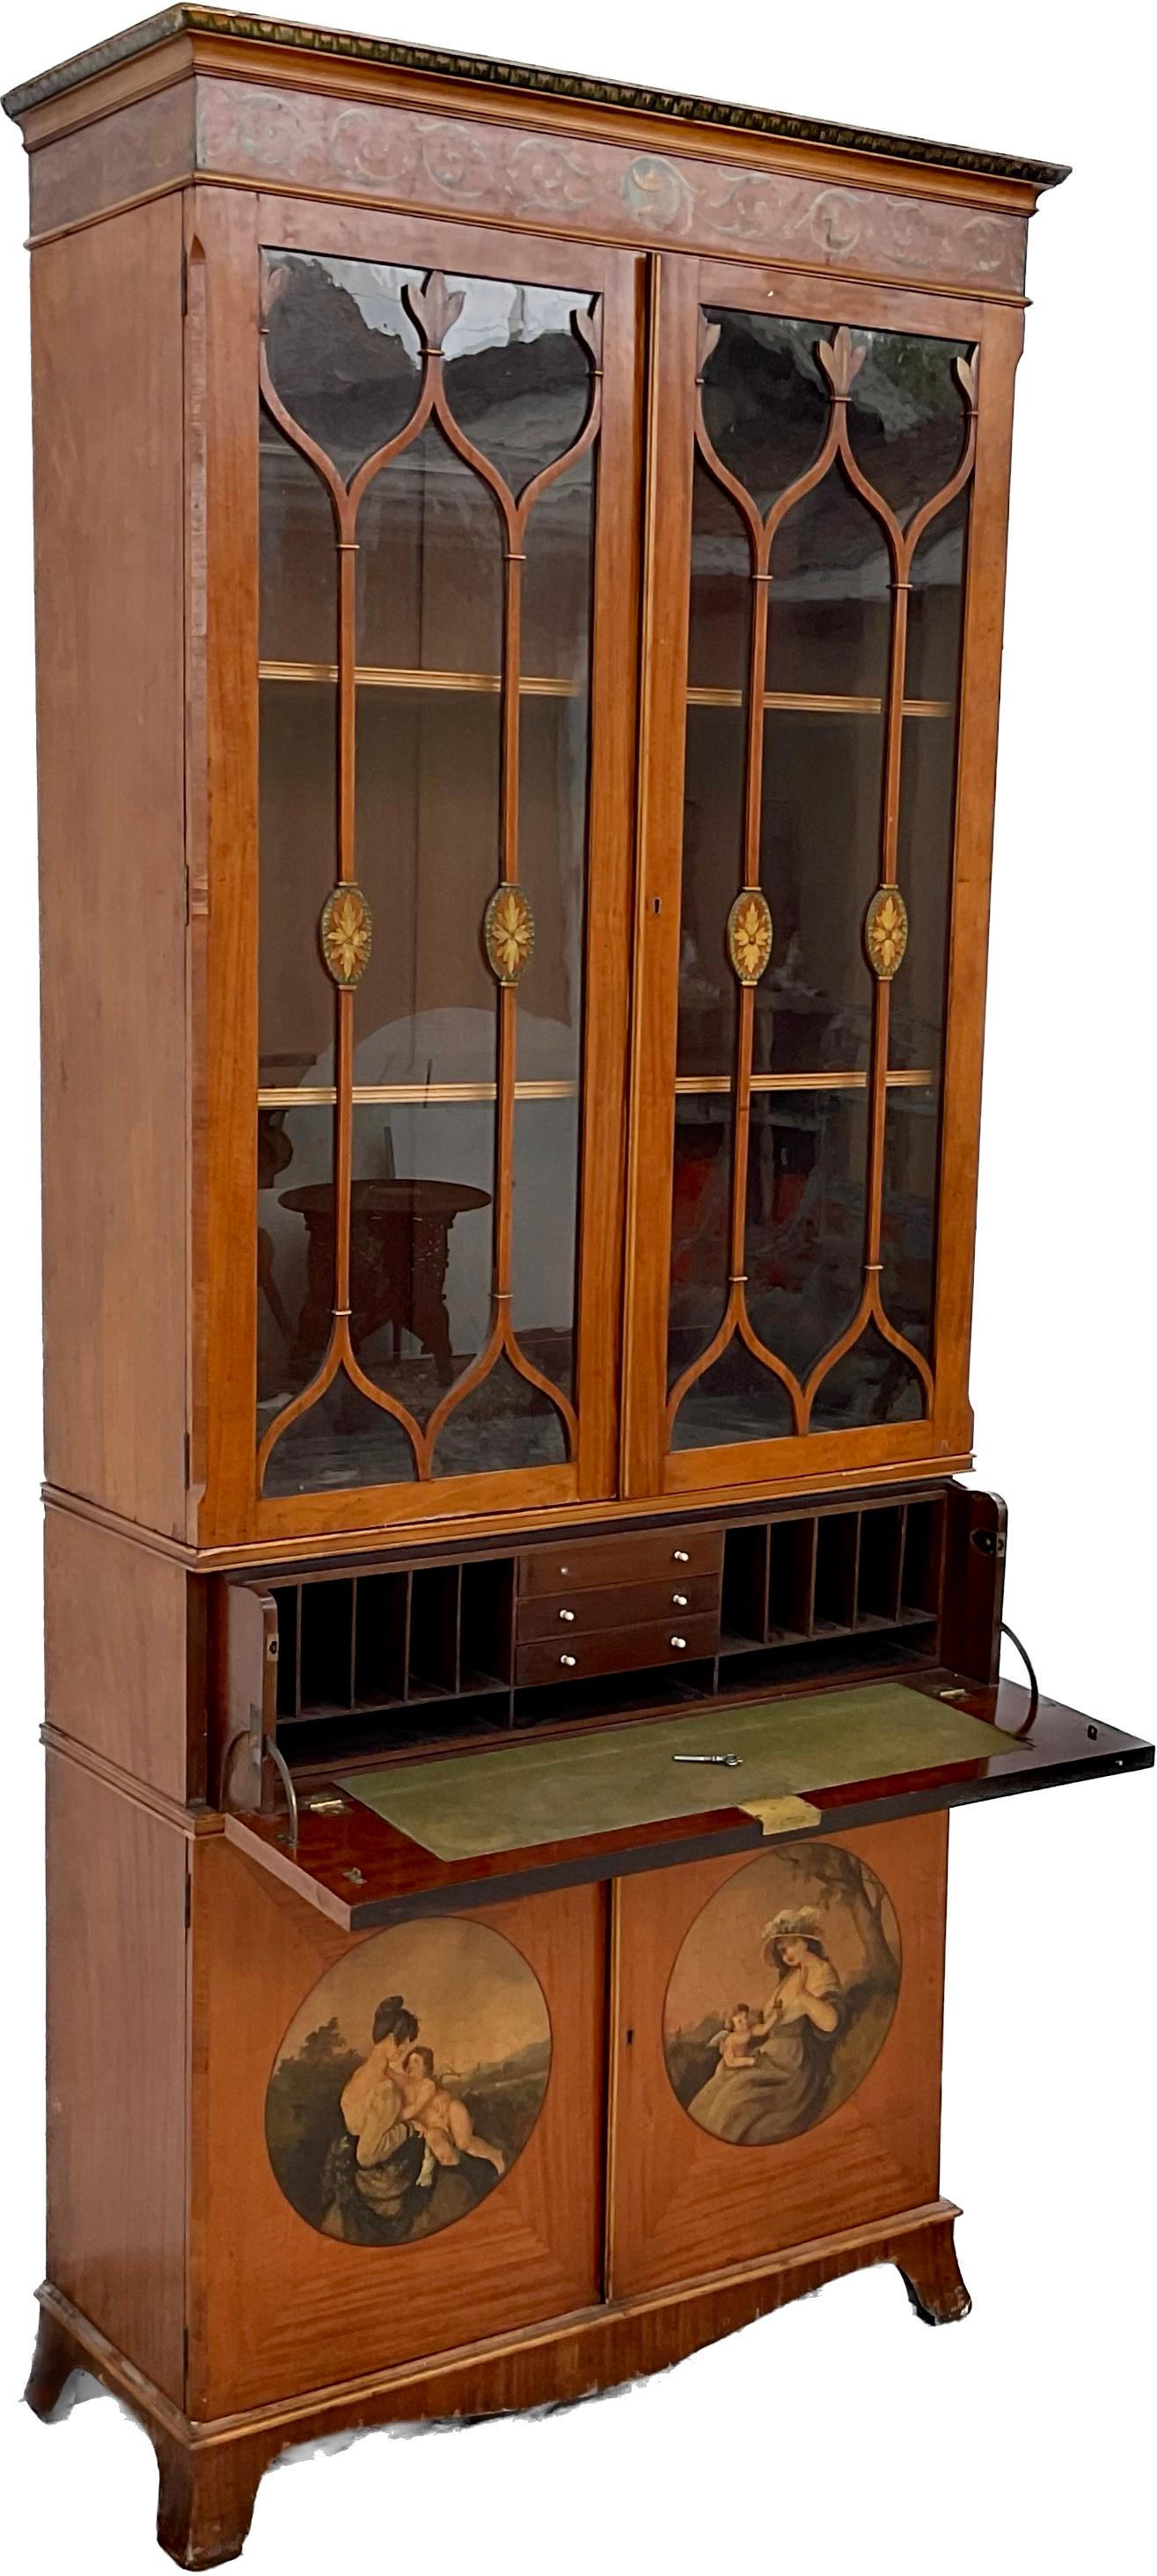 19th Century English Satinwood secretary/bookcase. Two astragal glazed doors above open to reveal two adjustable shelves for display, a fall front opening to reveal a fully fitted interior, over two further cabinet doors with hand painted portraits.